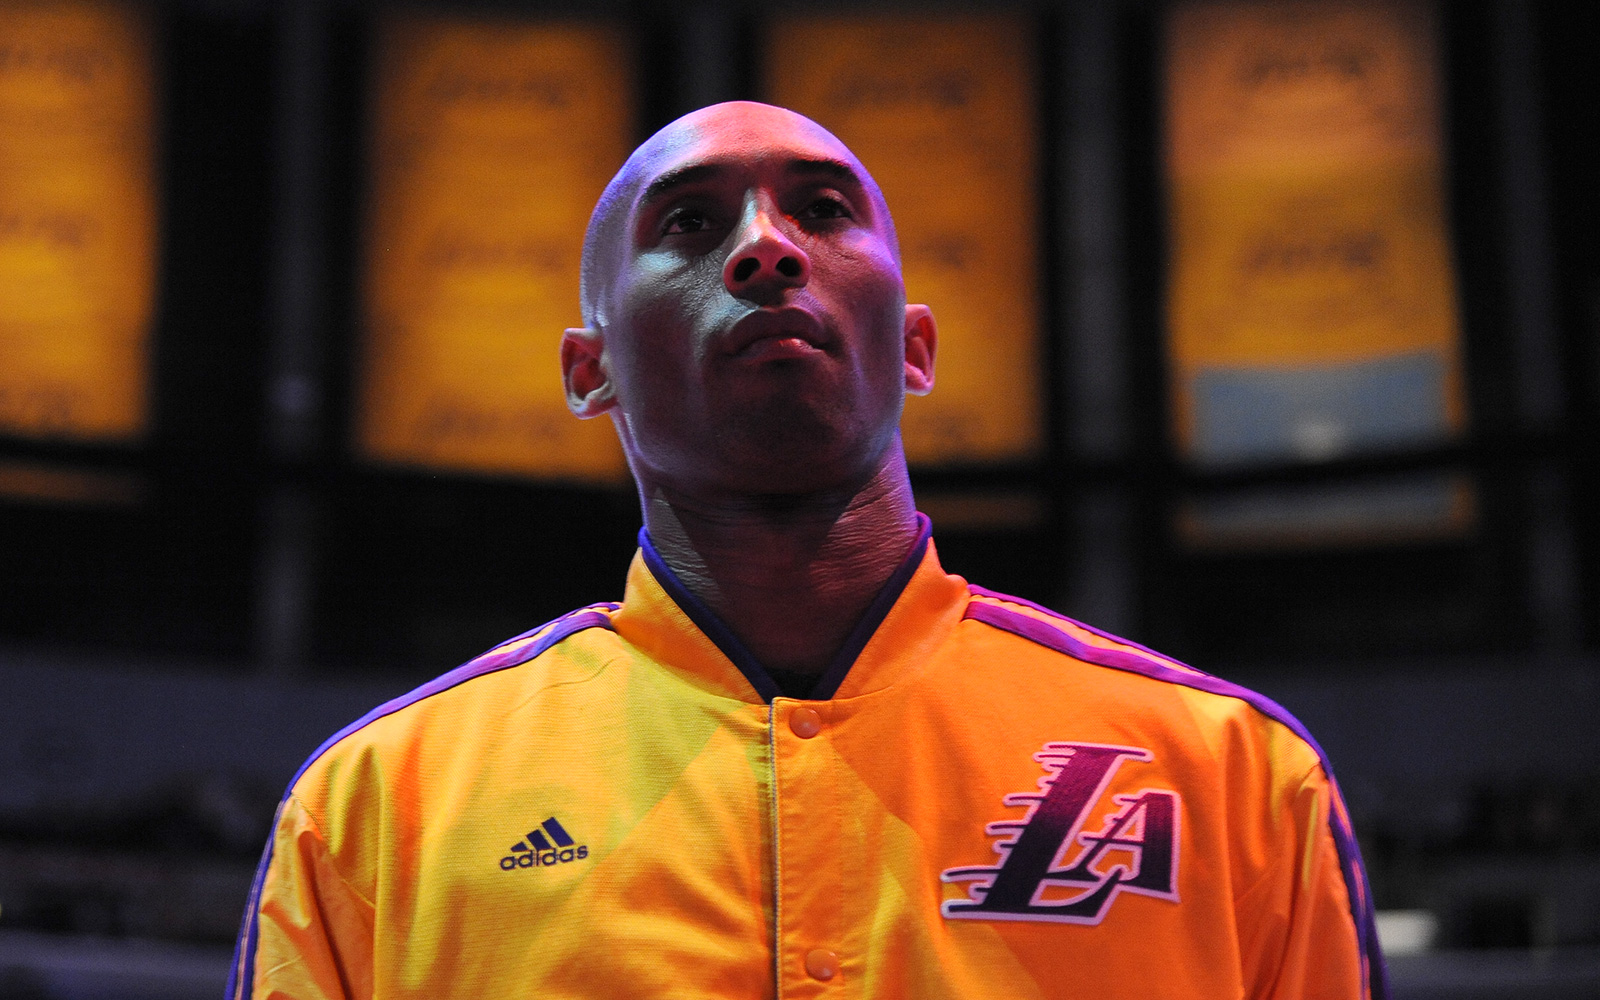 Second career act for Kobe Bryant ends all too soon